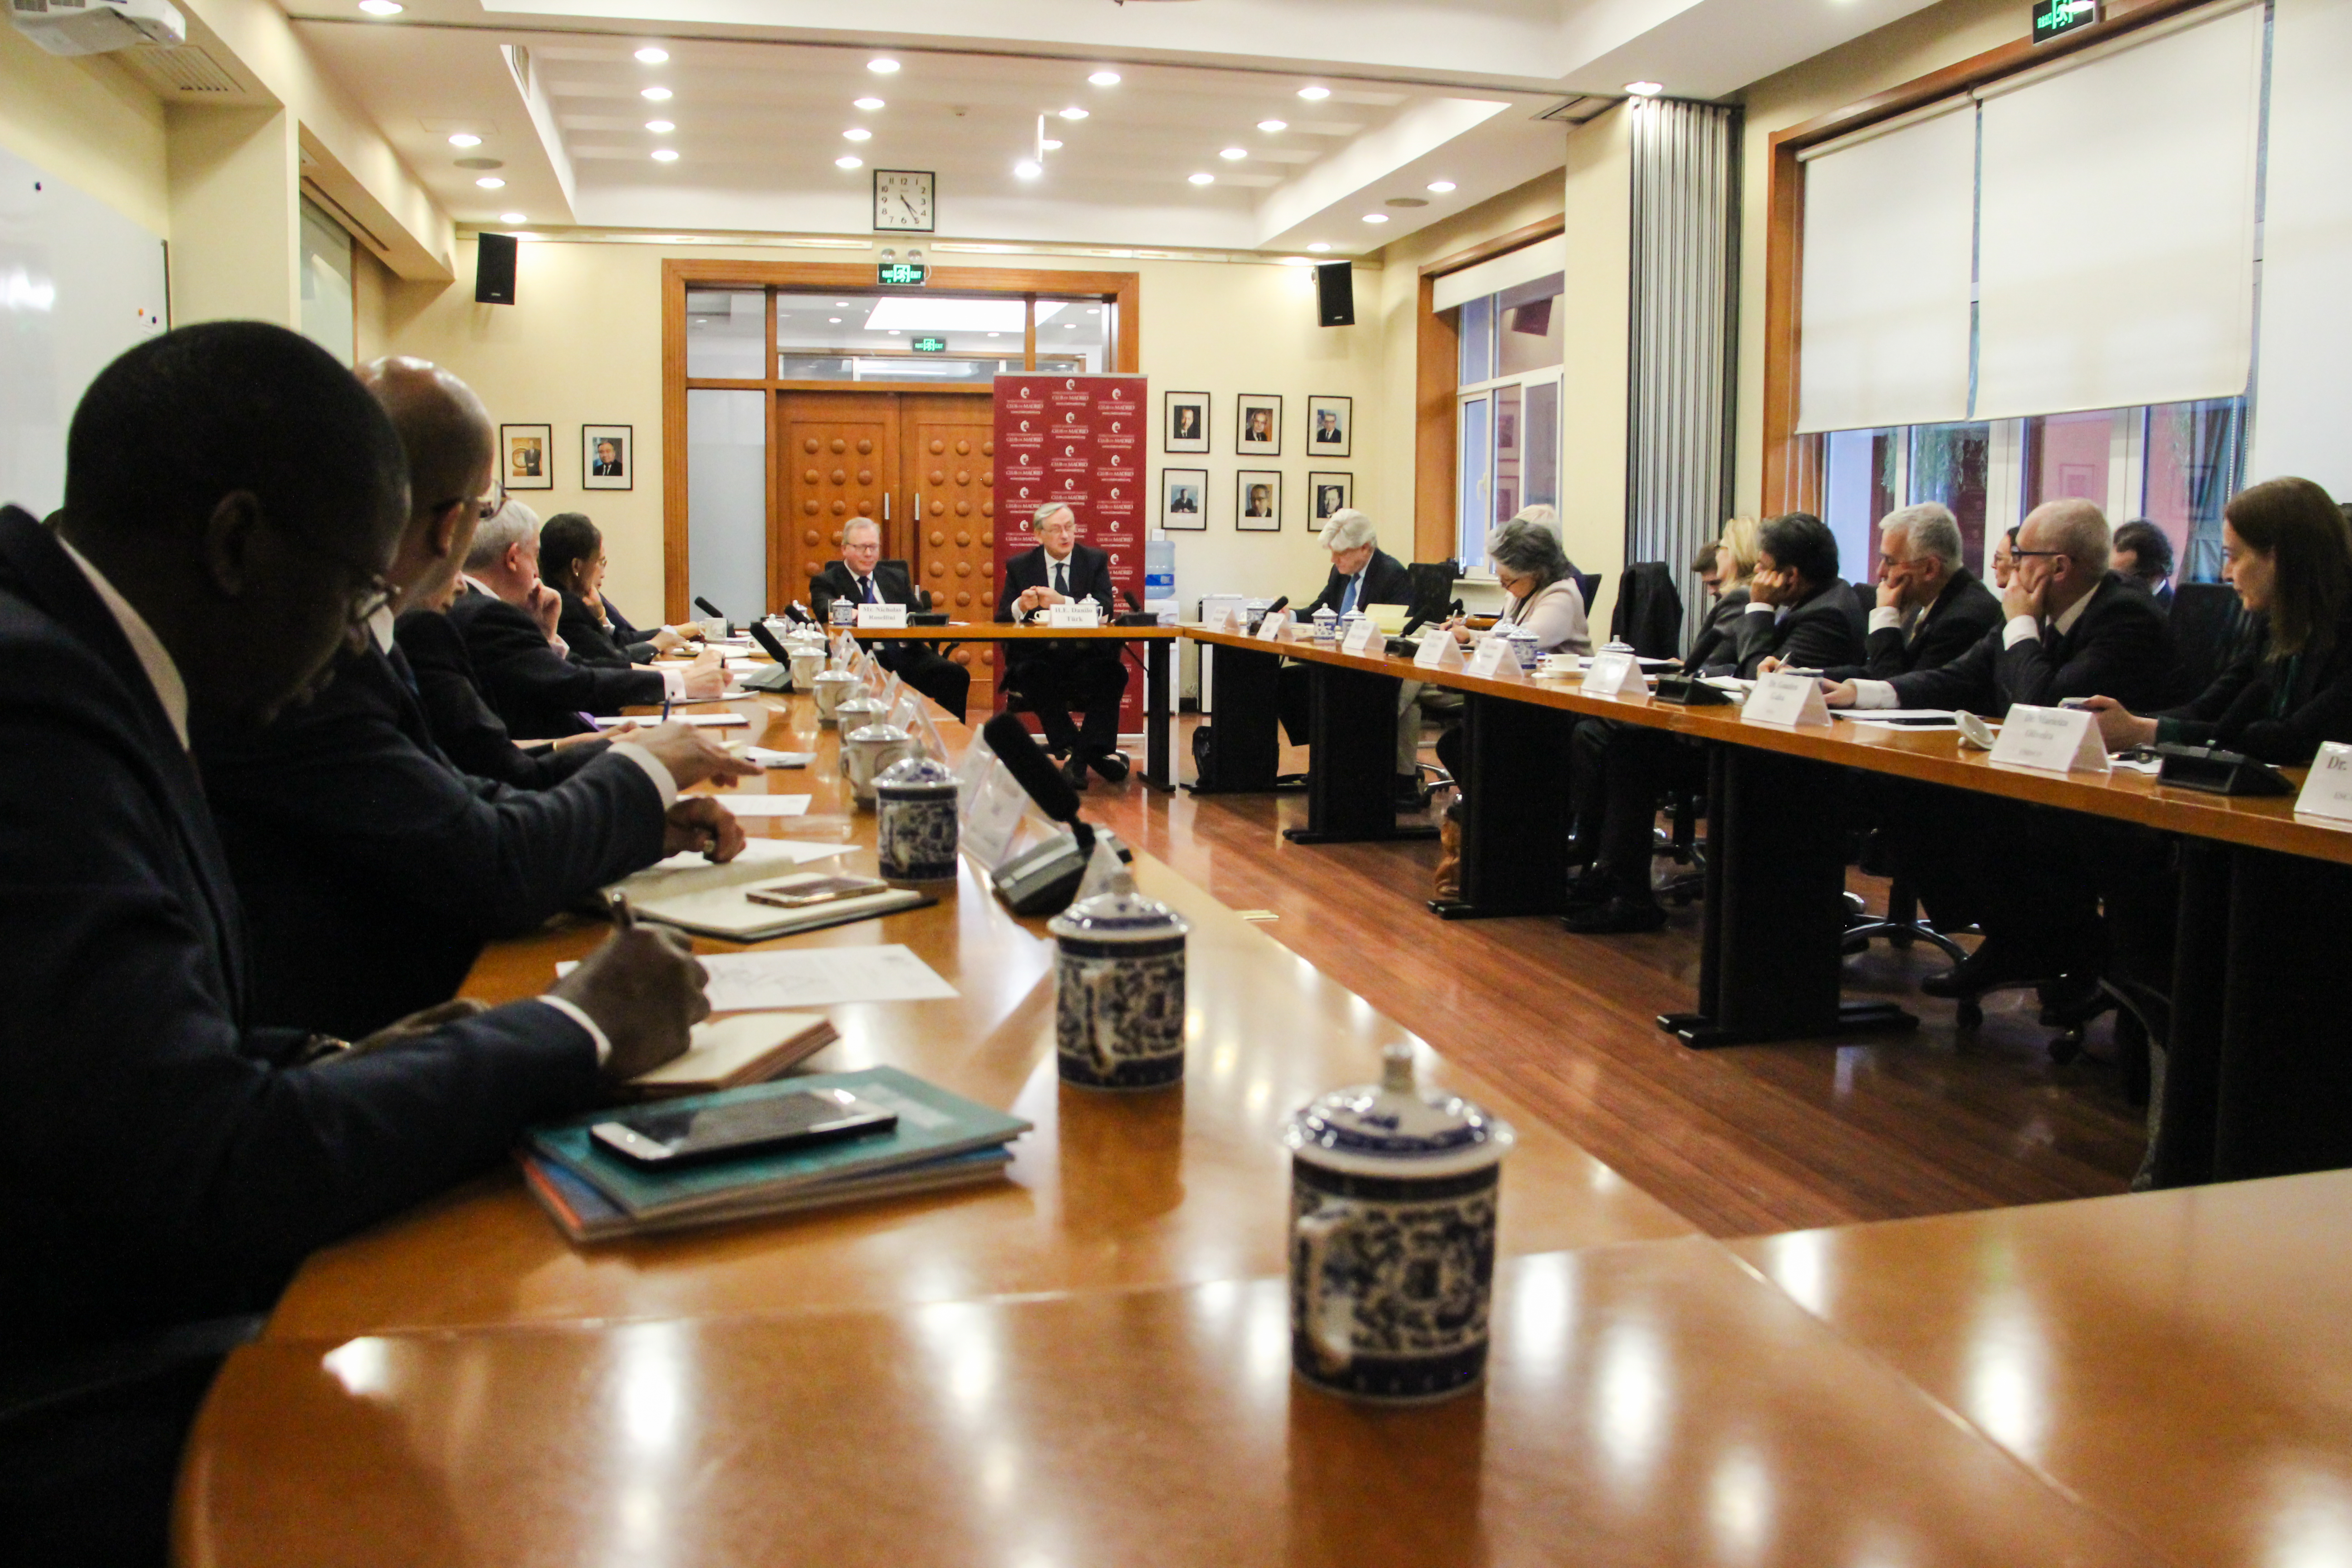 Club de Madrid Members exchange ideas for a renewed multilateral system at United Nations China